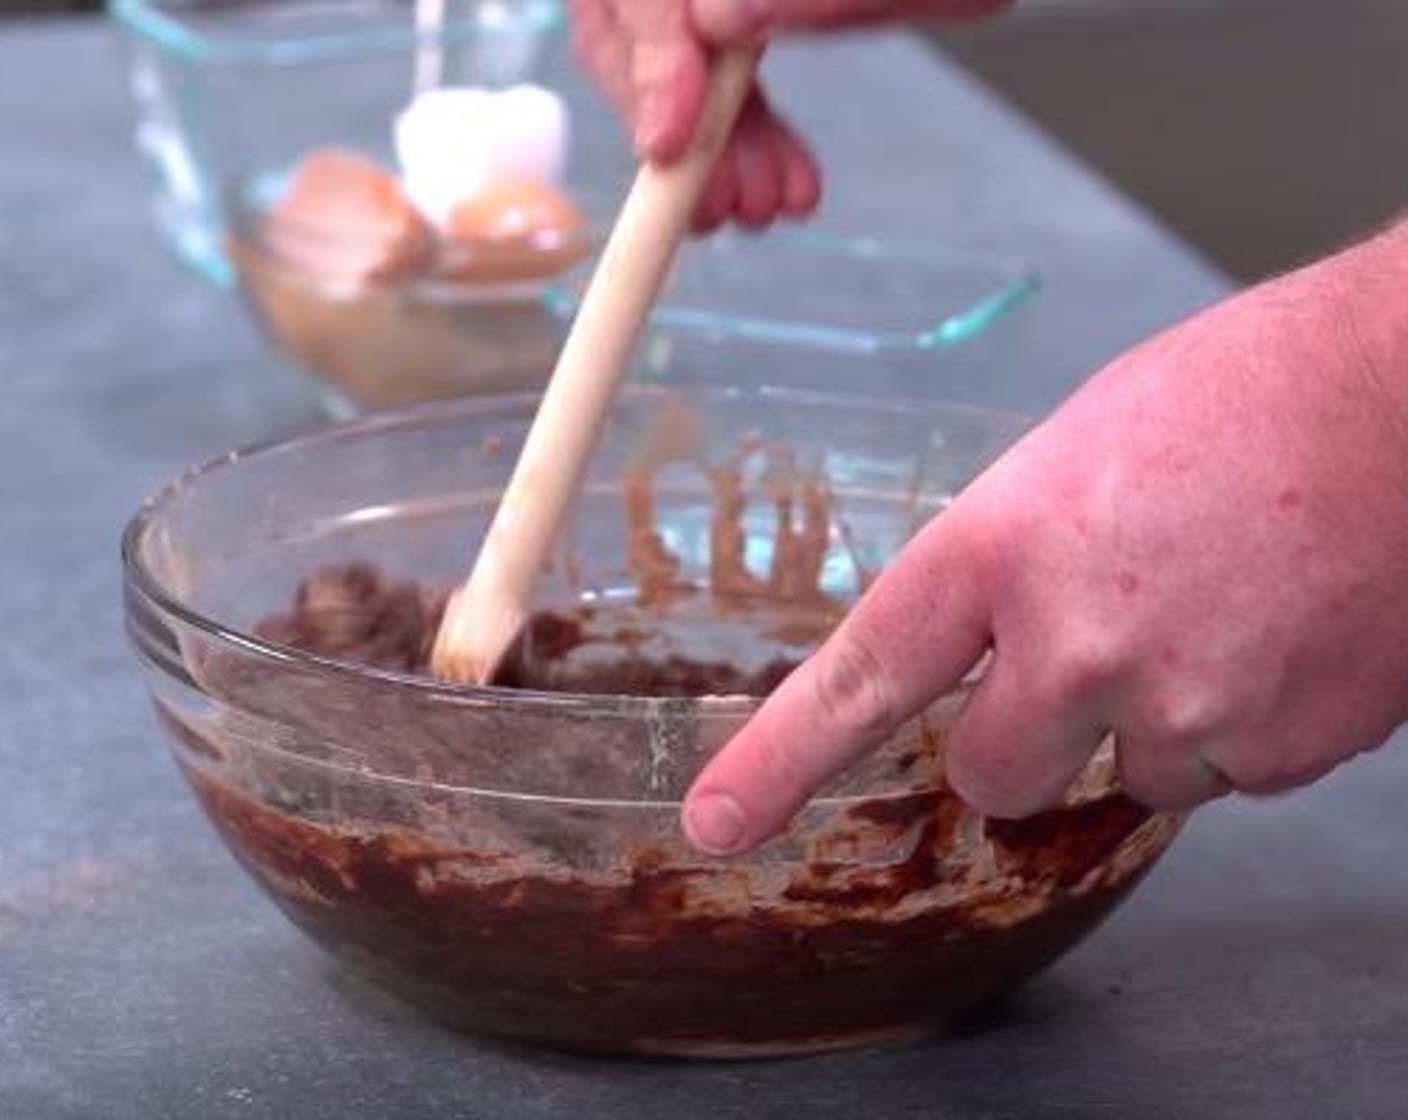 step 1 Put Caster Sugar (1 1/4 cups), All-Purpose Flour (1 cup), Unsweetened Cocoa Powder (1/2 cup) into a mixing bowl and use a wooden spoon to mix it all together until it's combined. Add Butter (1/2 cup) and Eggs (4) into the mixing bowl and mix everything together until smooth.